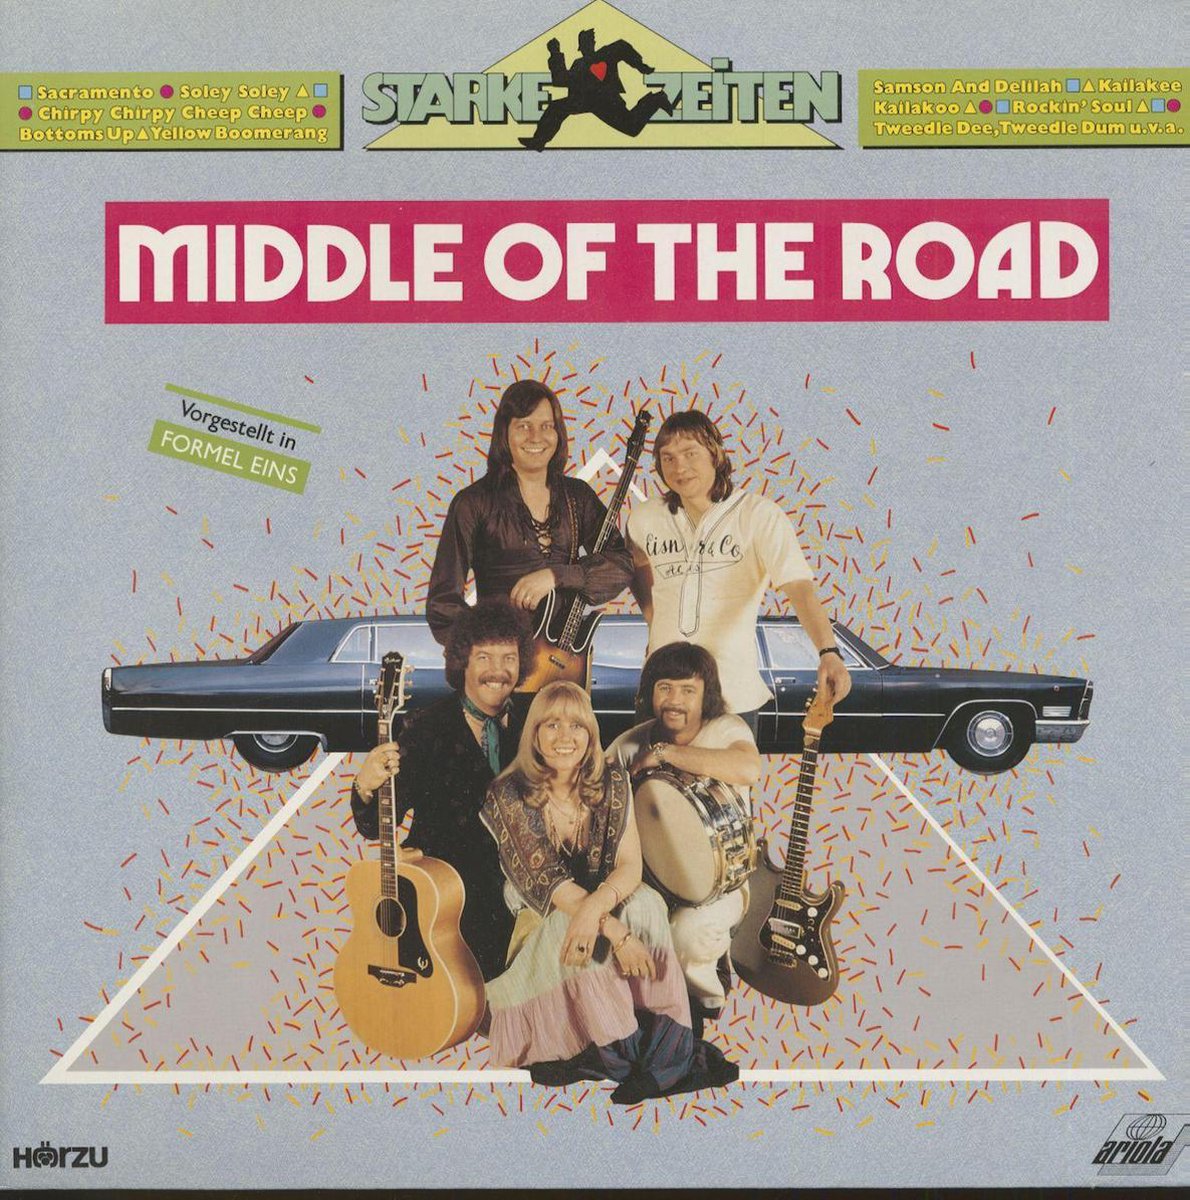 Middle Of The Road - Starke Zeiten - Complete Original Hitcollection - Middle Of The Road